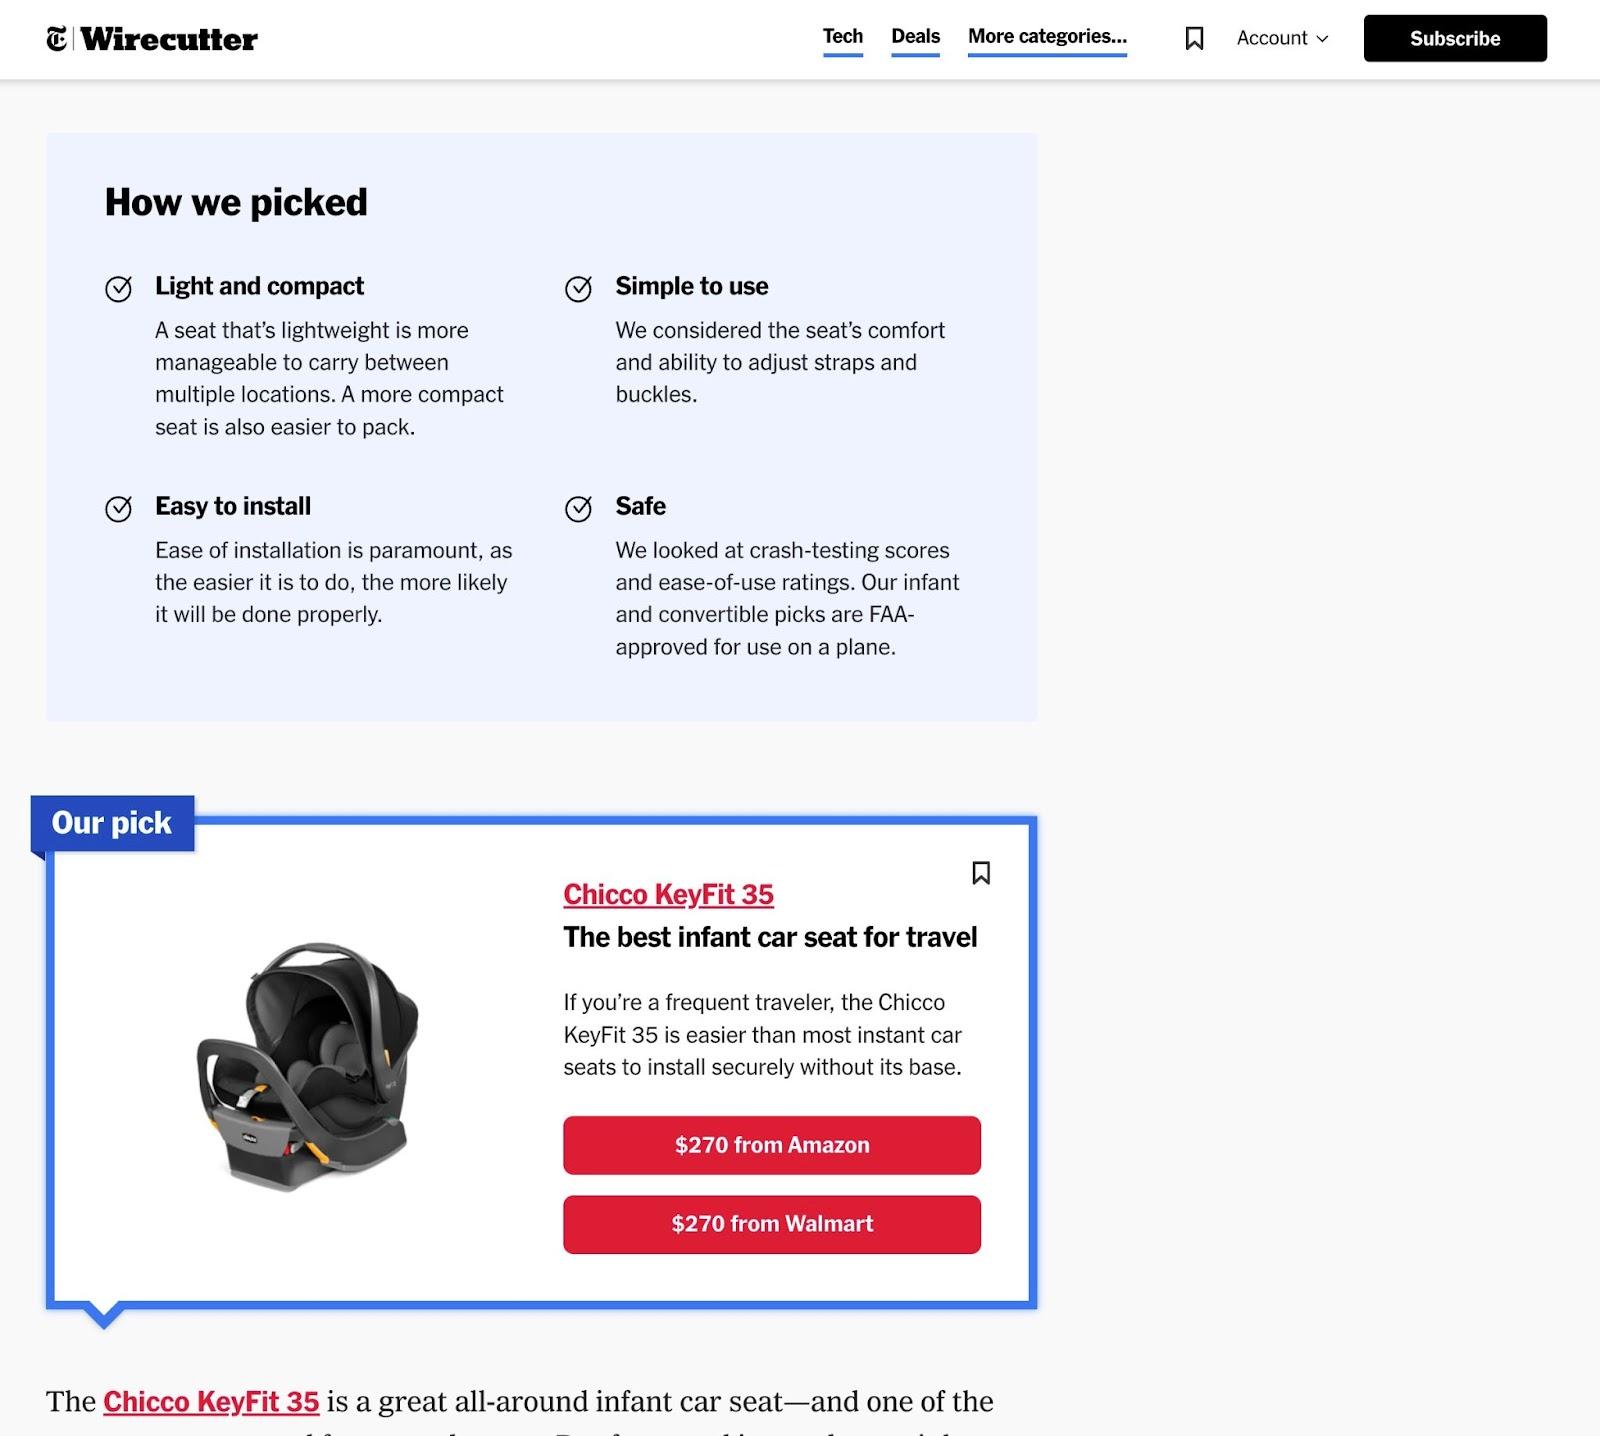 ux design principles and best practices; Wirecutter